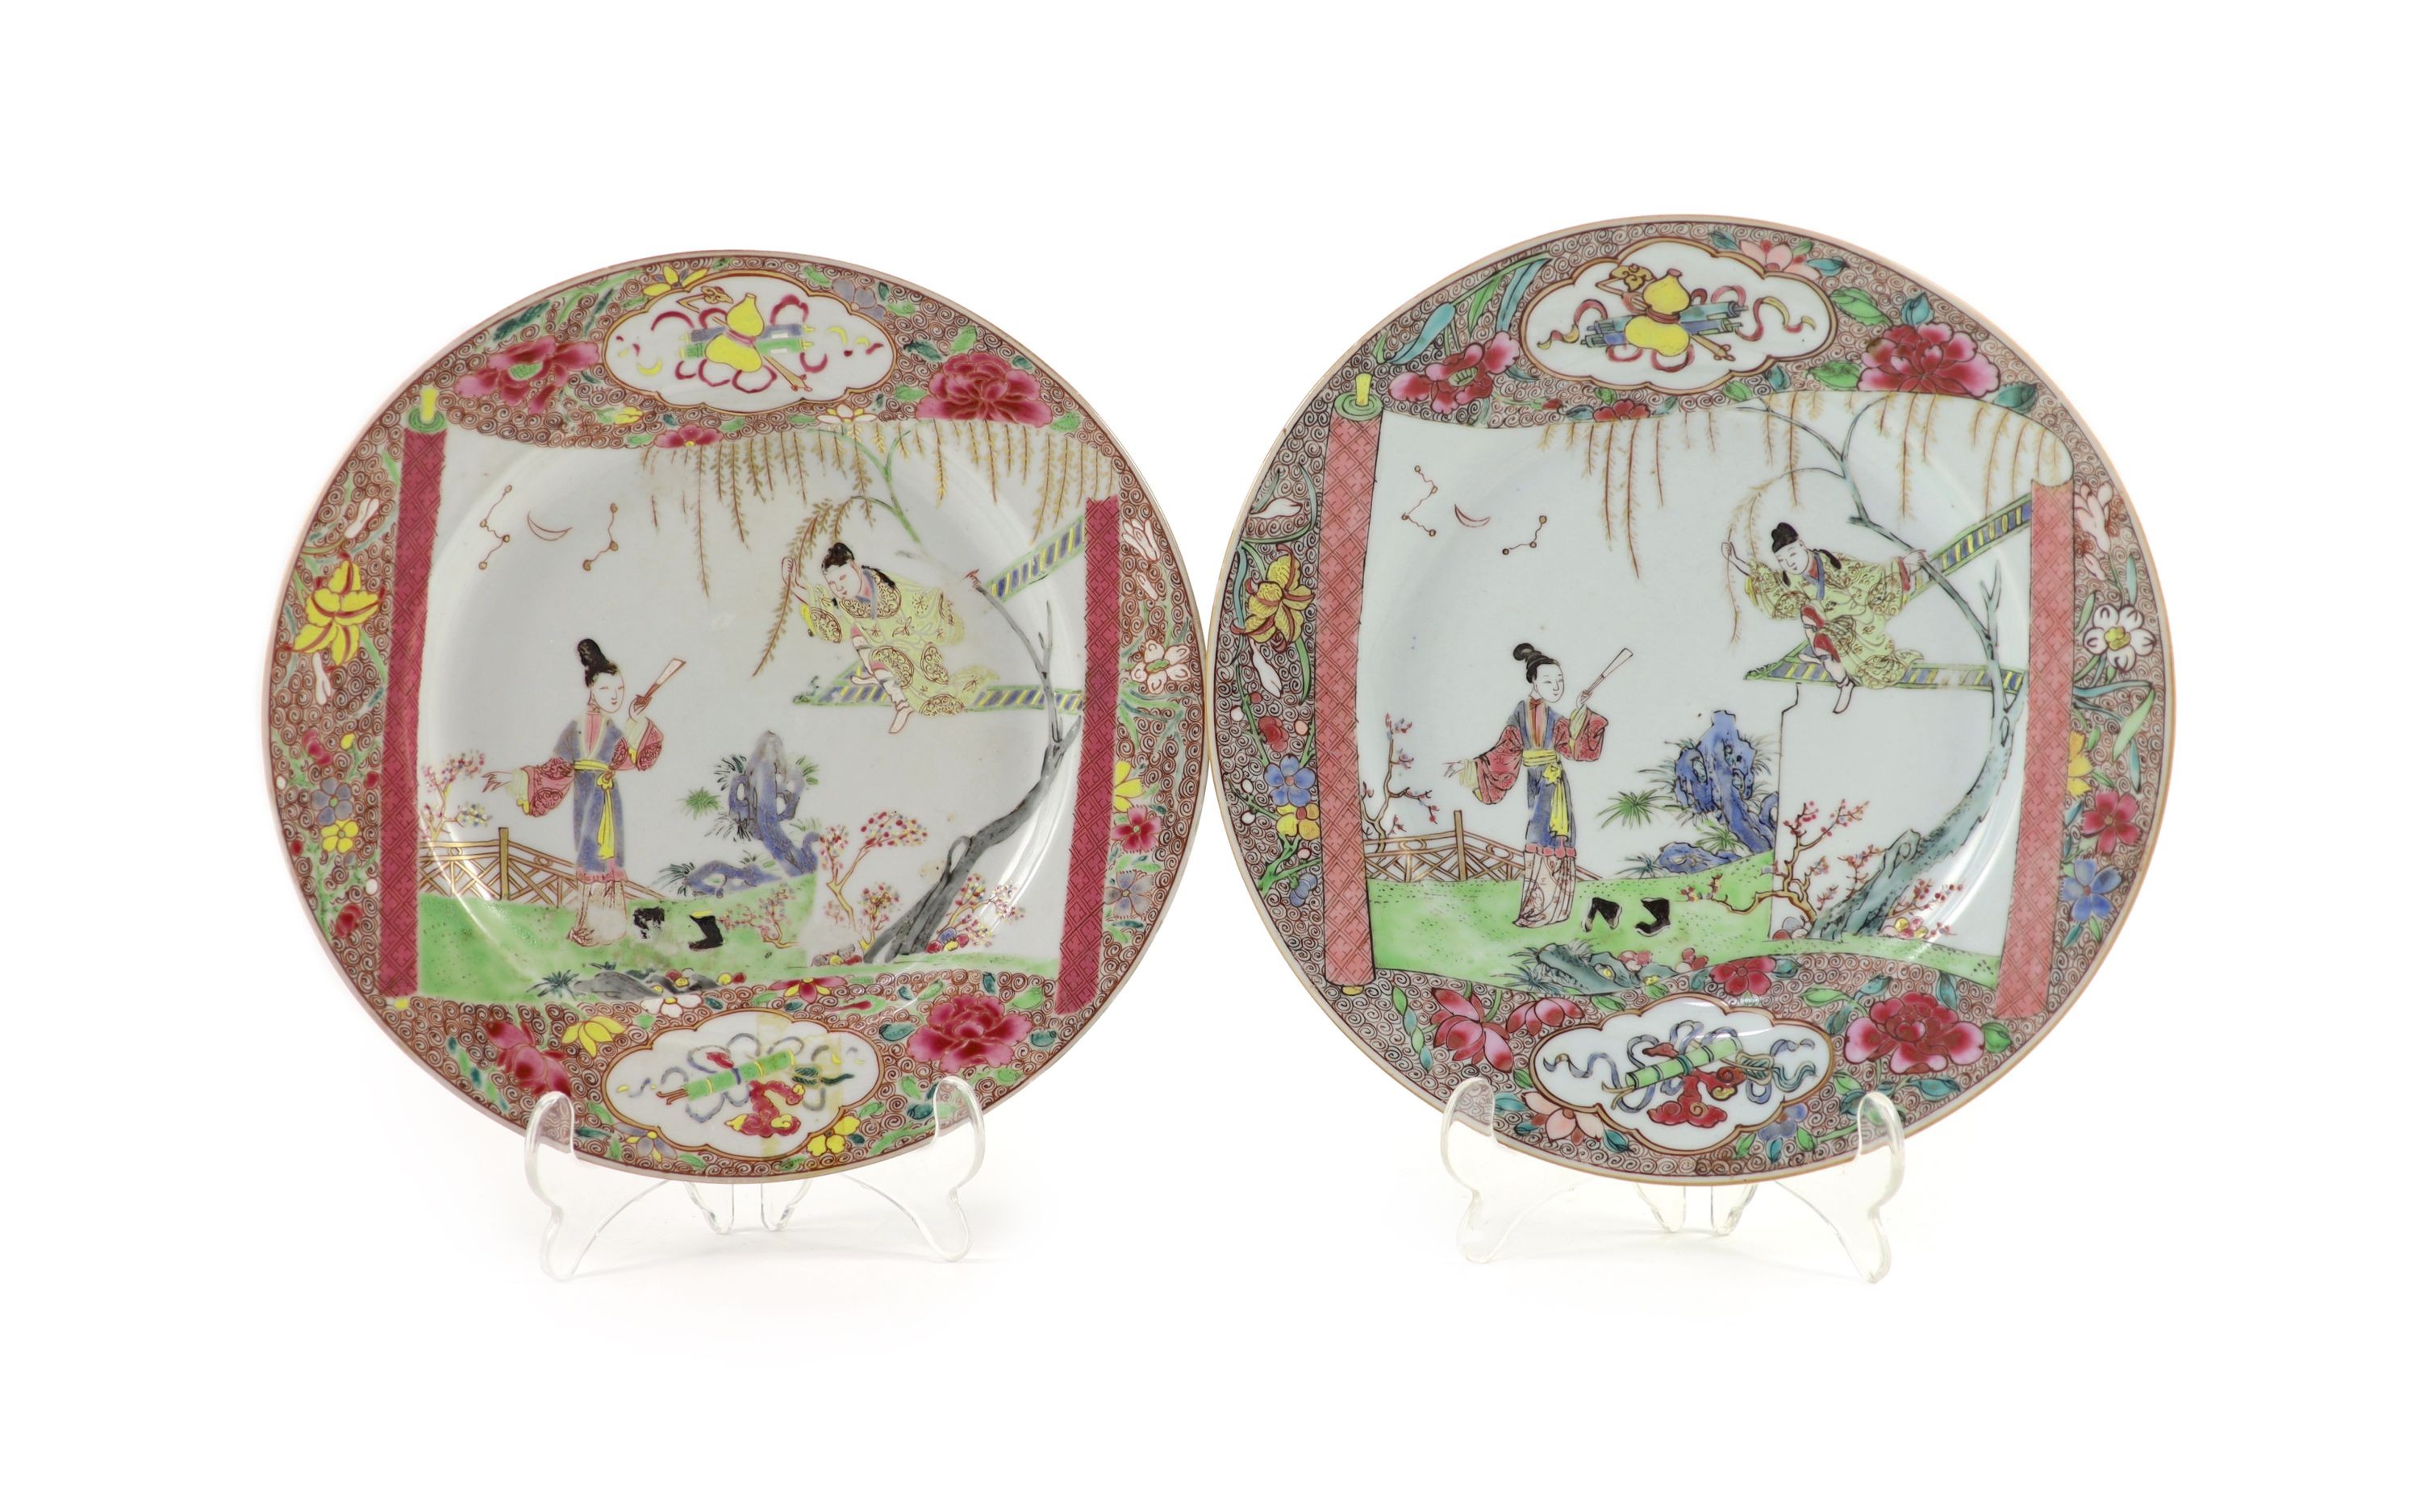 A near pair of Chinese famille rose plates, early Qianlong period, 23.3 and 22.7cm diameter